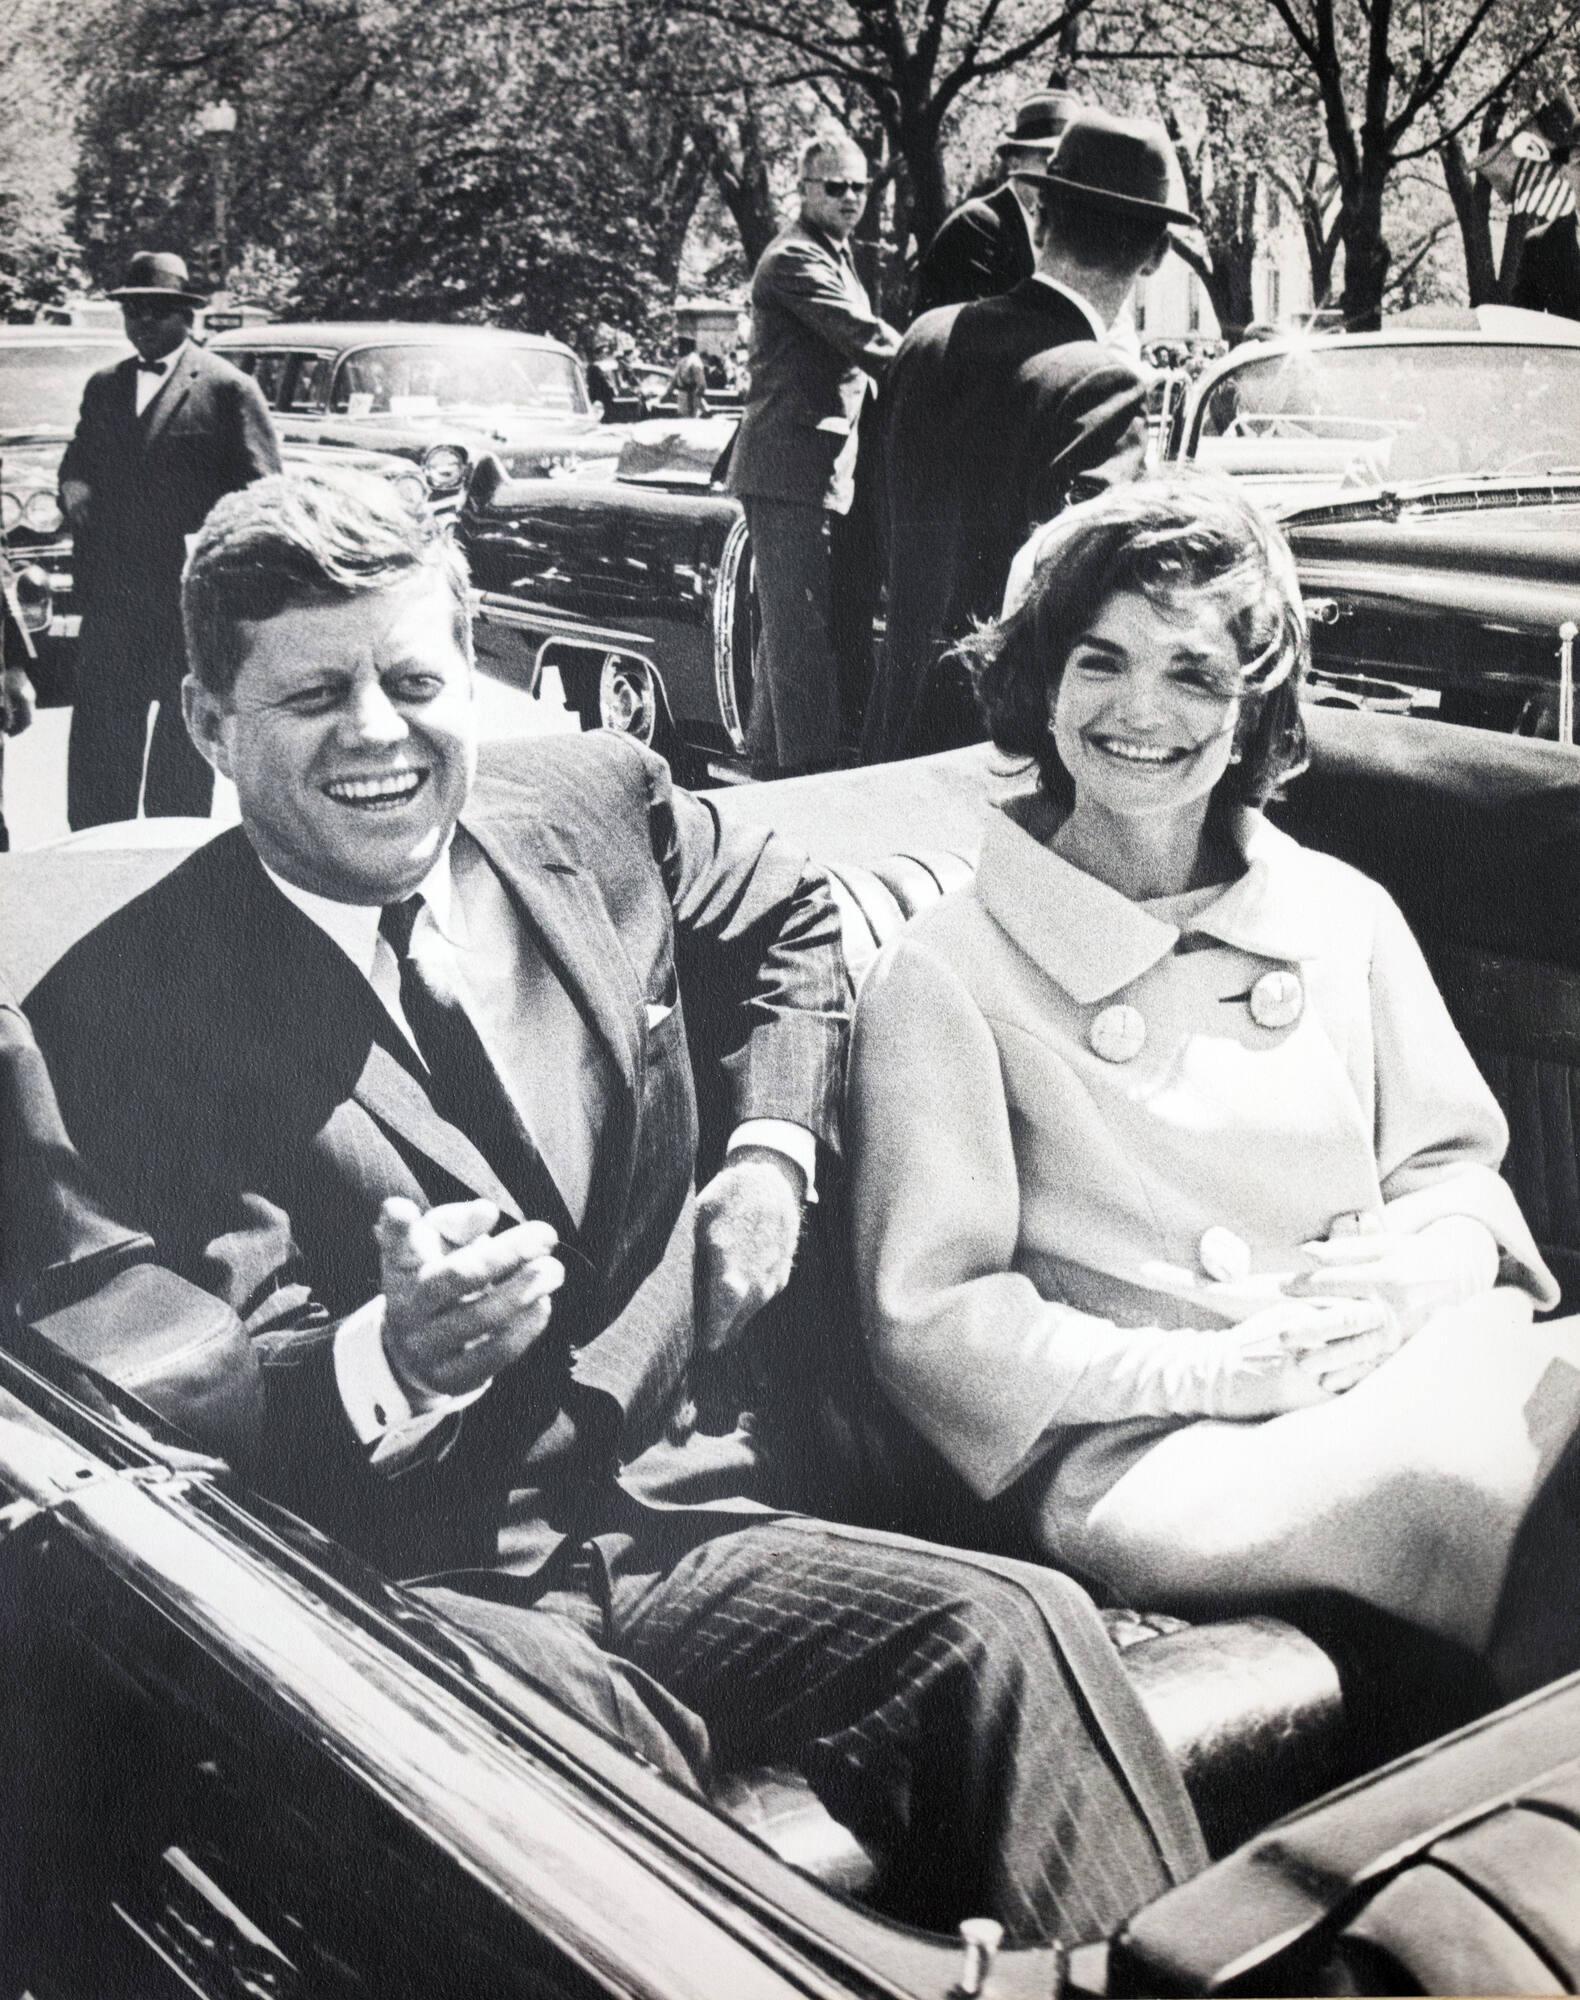 Photograph Of John And Jacqueline Kennedy In Convertible All Artifacts The John F Kennedy 